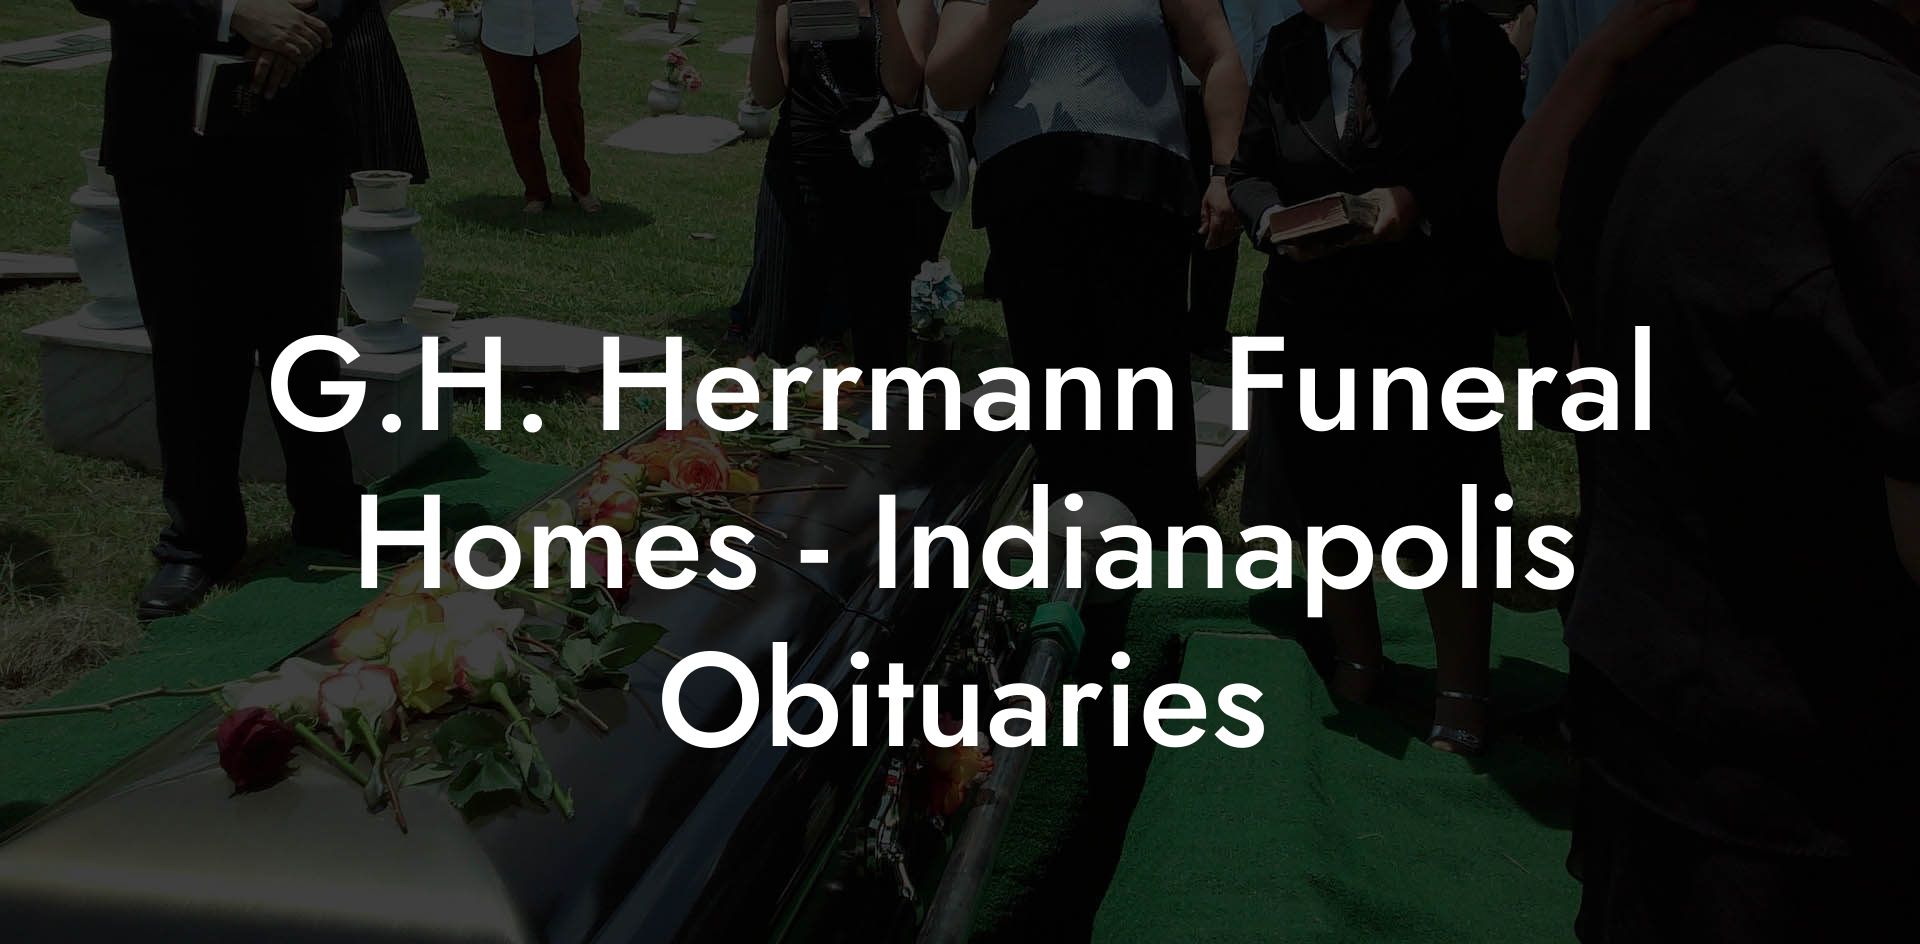 G.H. Herrmann Funeral Homes - Indianapolis Obituaries